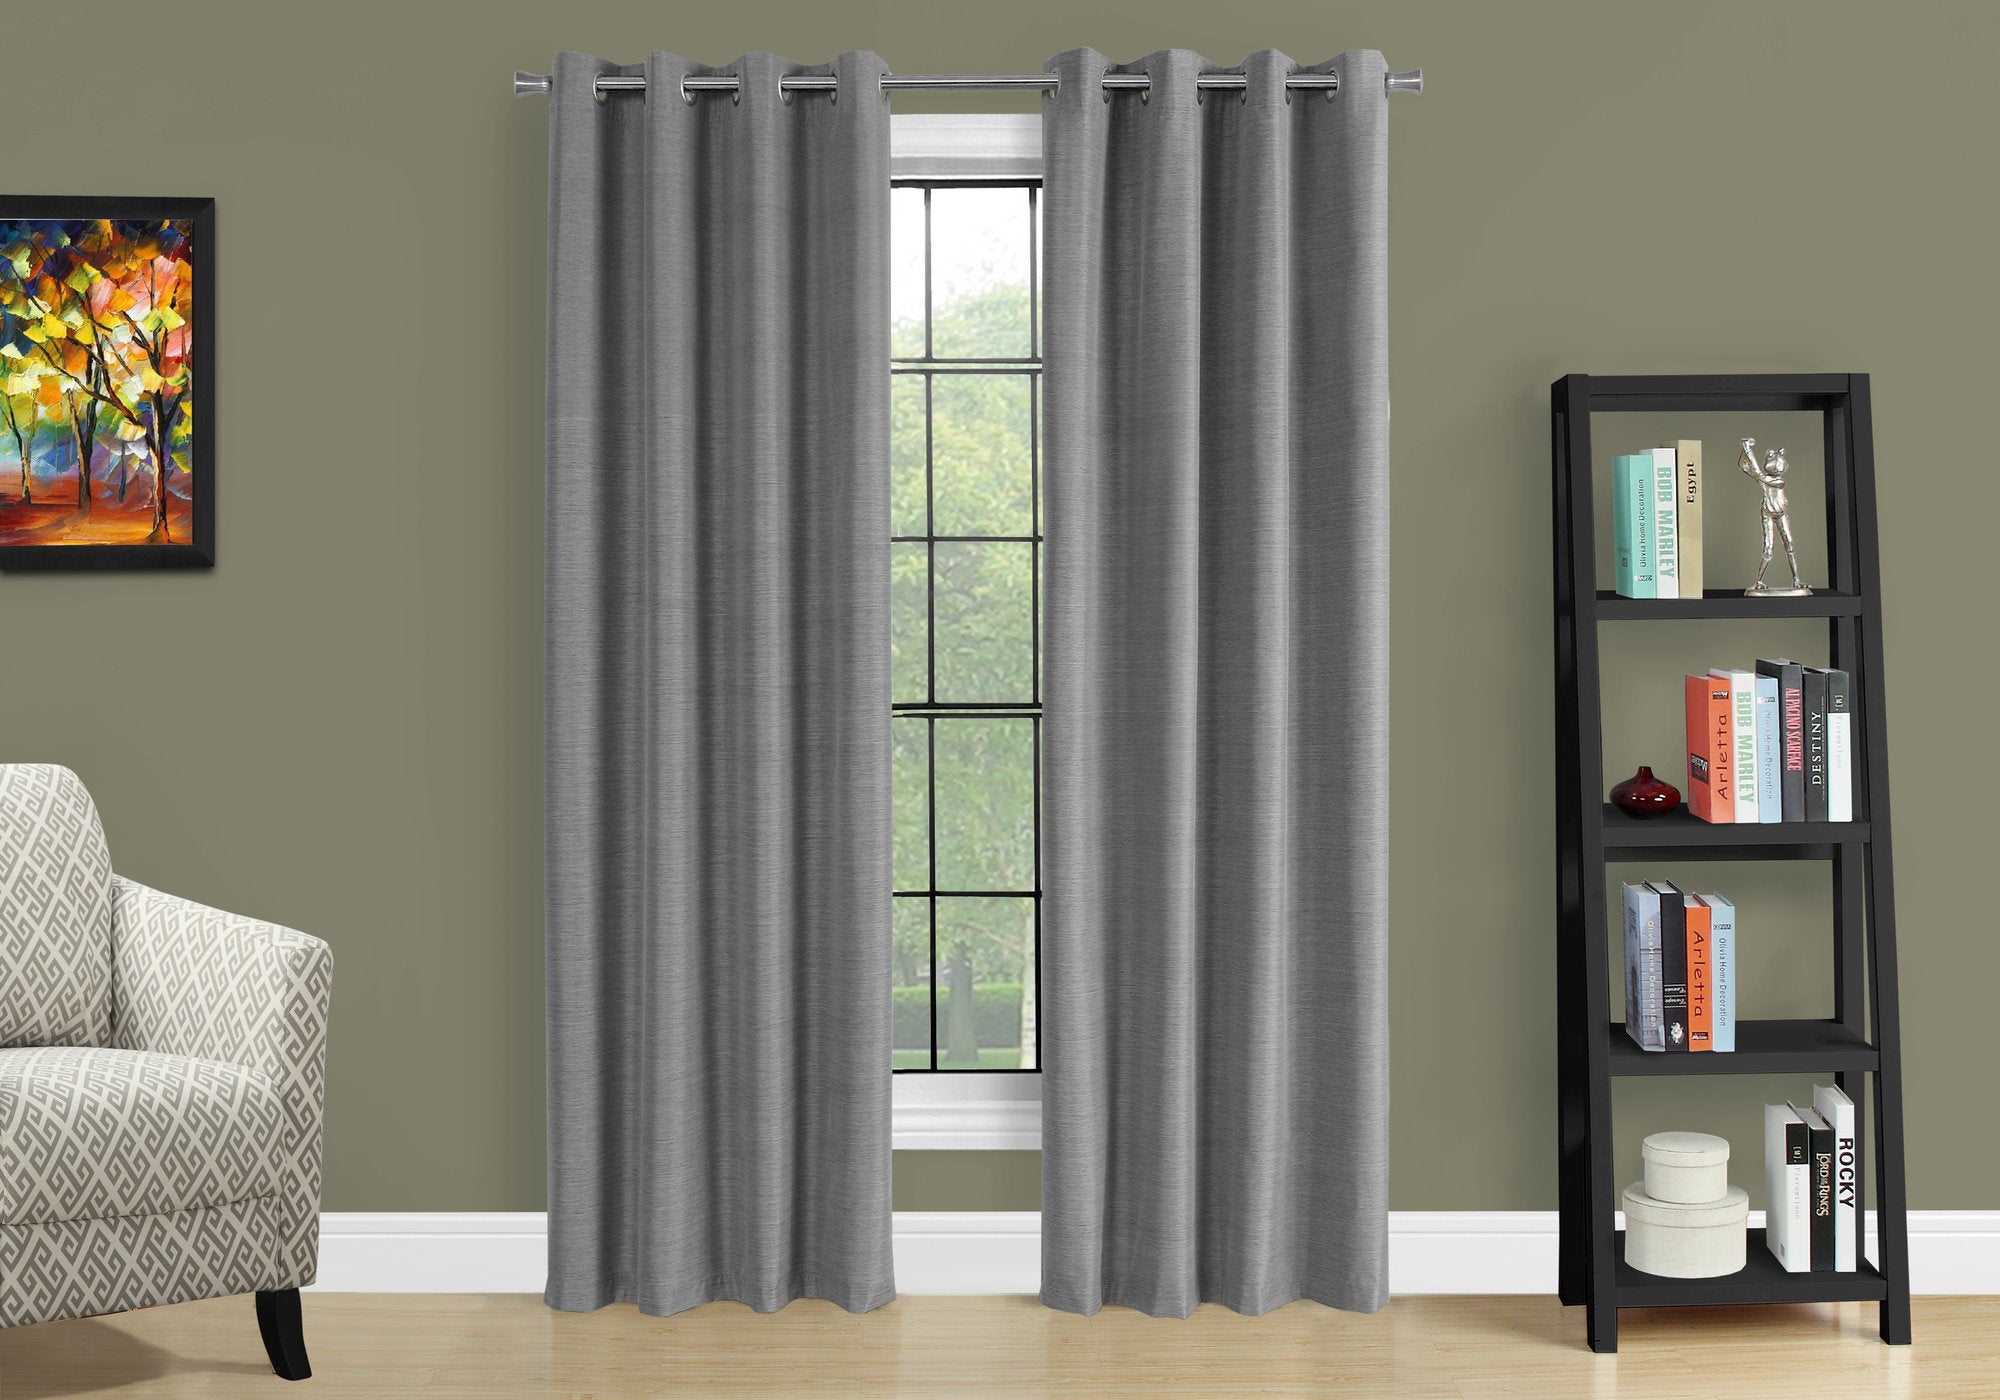 MN-859842    Curtain Panel, 2Pcs Set, 54"W X 95"L, 100% Blackout, Grommet, Living Room, Bedroom, Kitchen, Thermal Insulation Fabric, Polyester Full Light Blocking Fabric, Grey, Contemporary, Modern